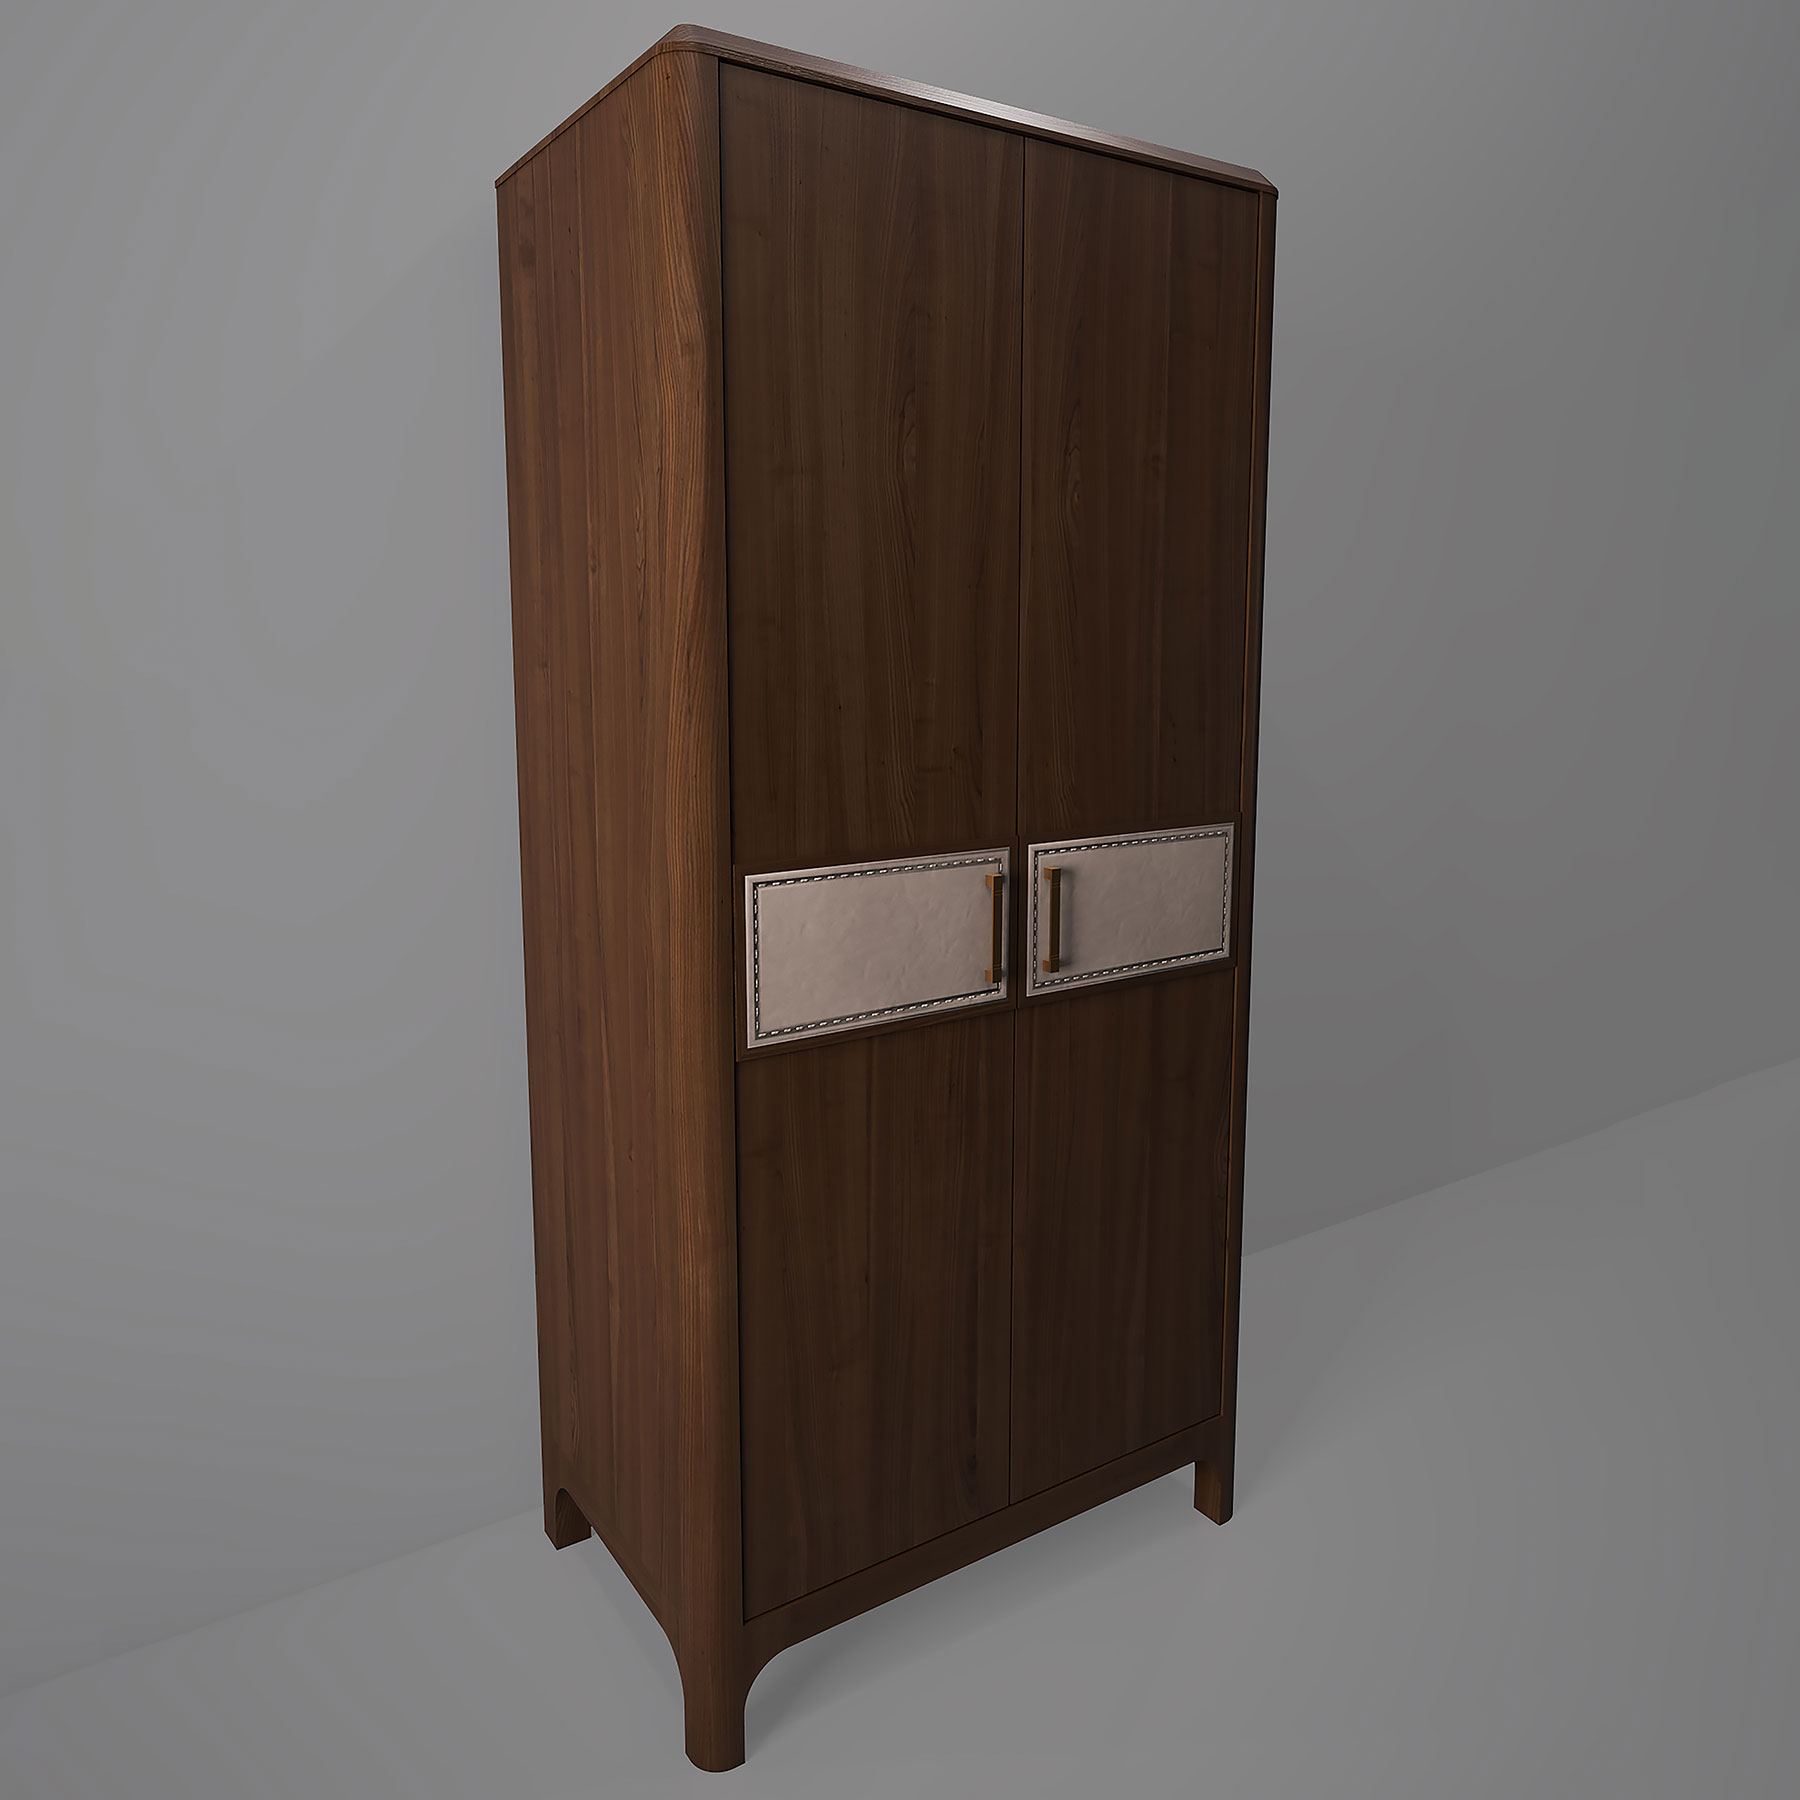 Two-door wardrobe from the Audrey collection